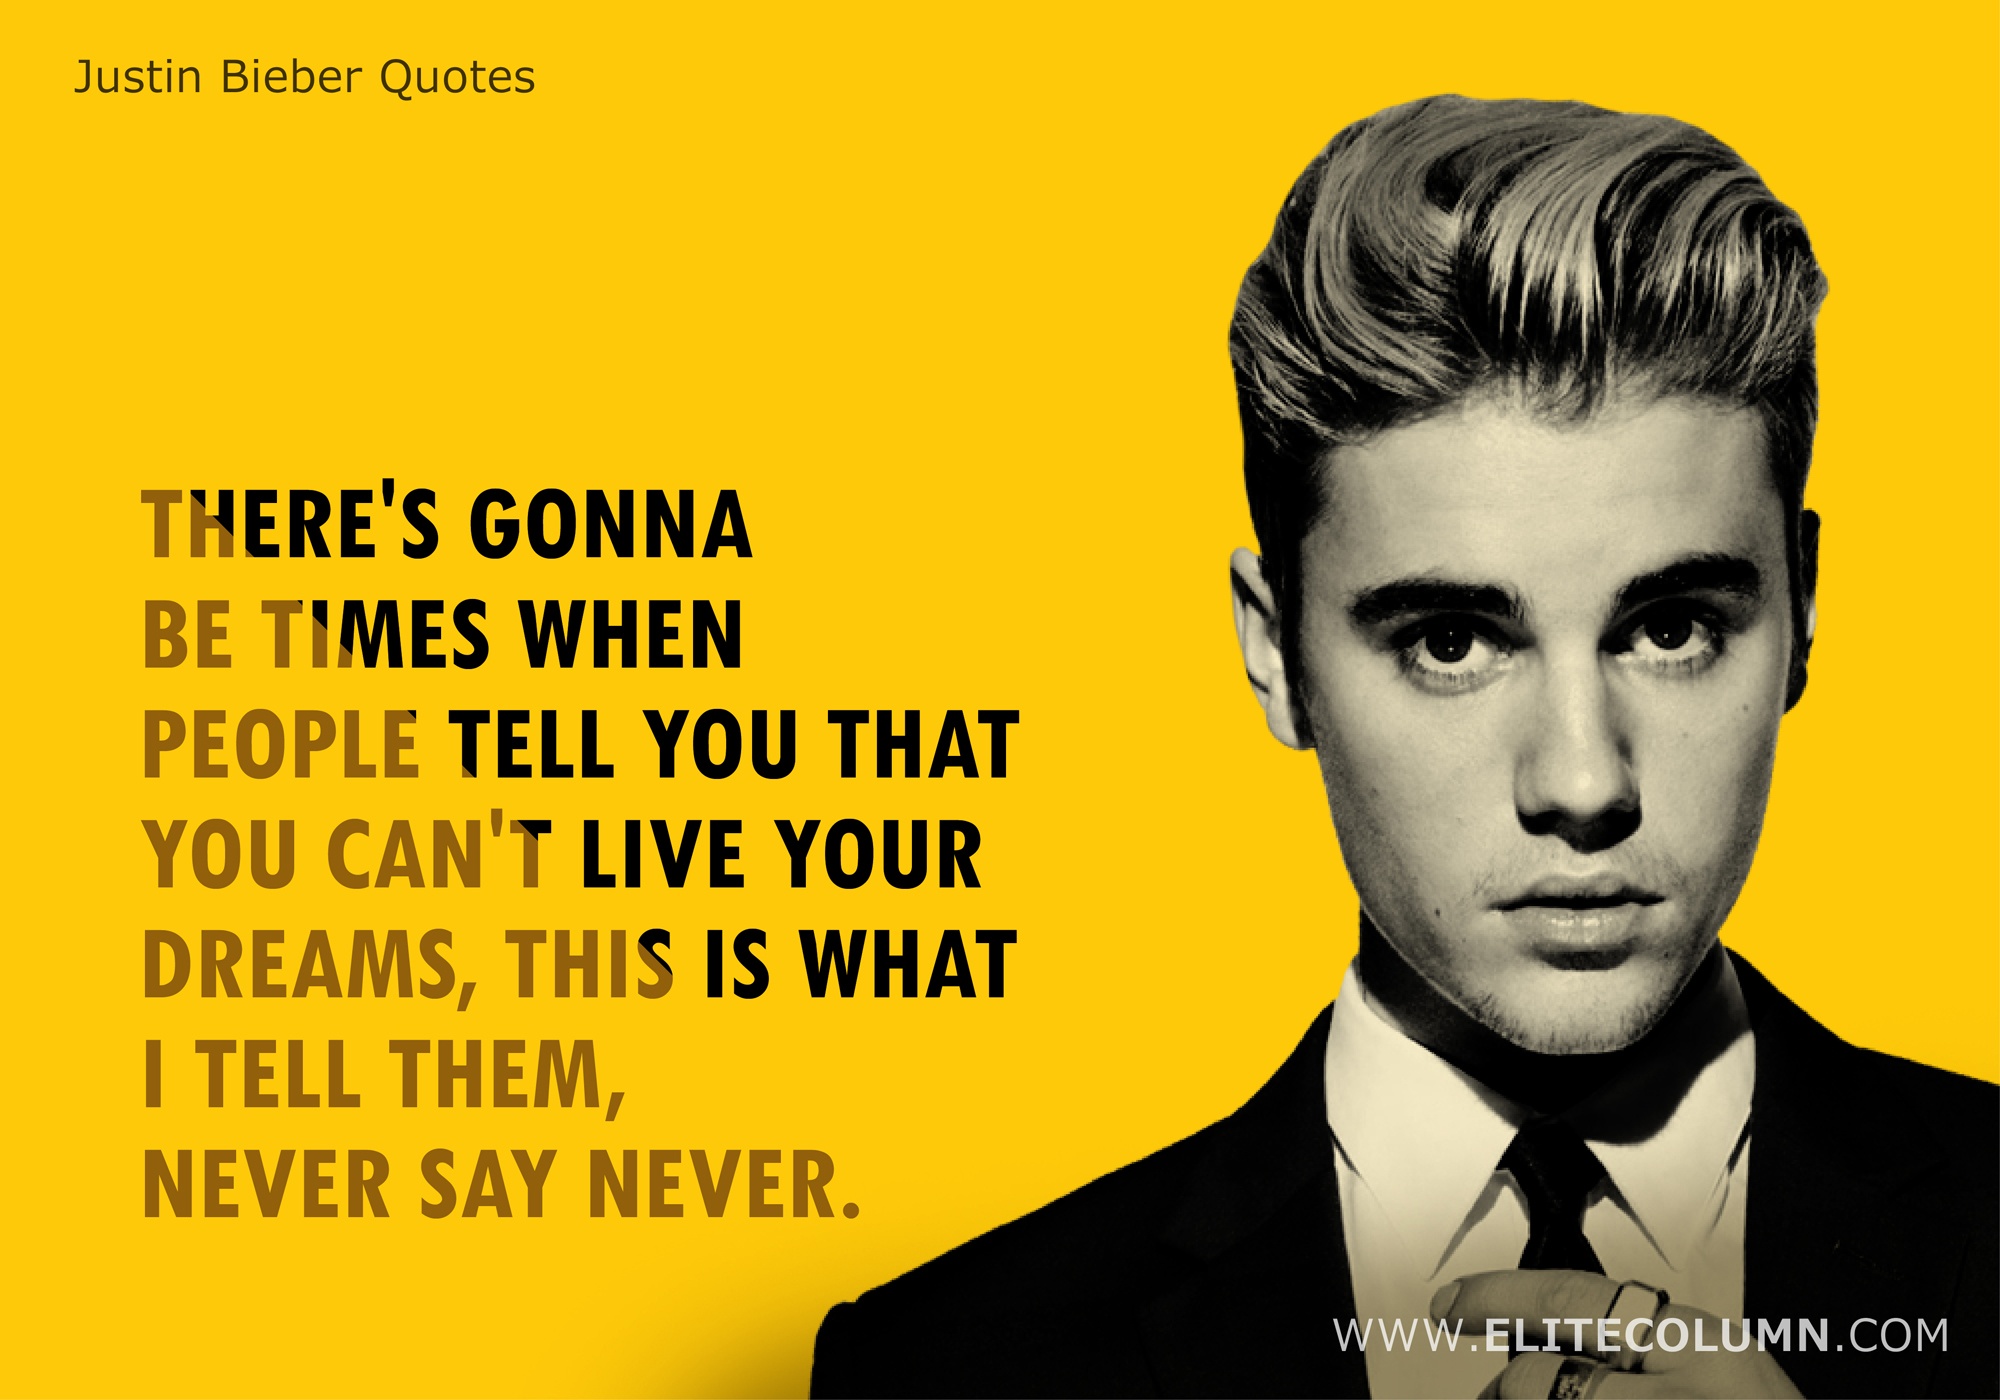 6 Justin Bieber Quotes About Love